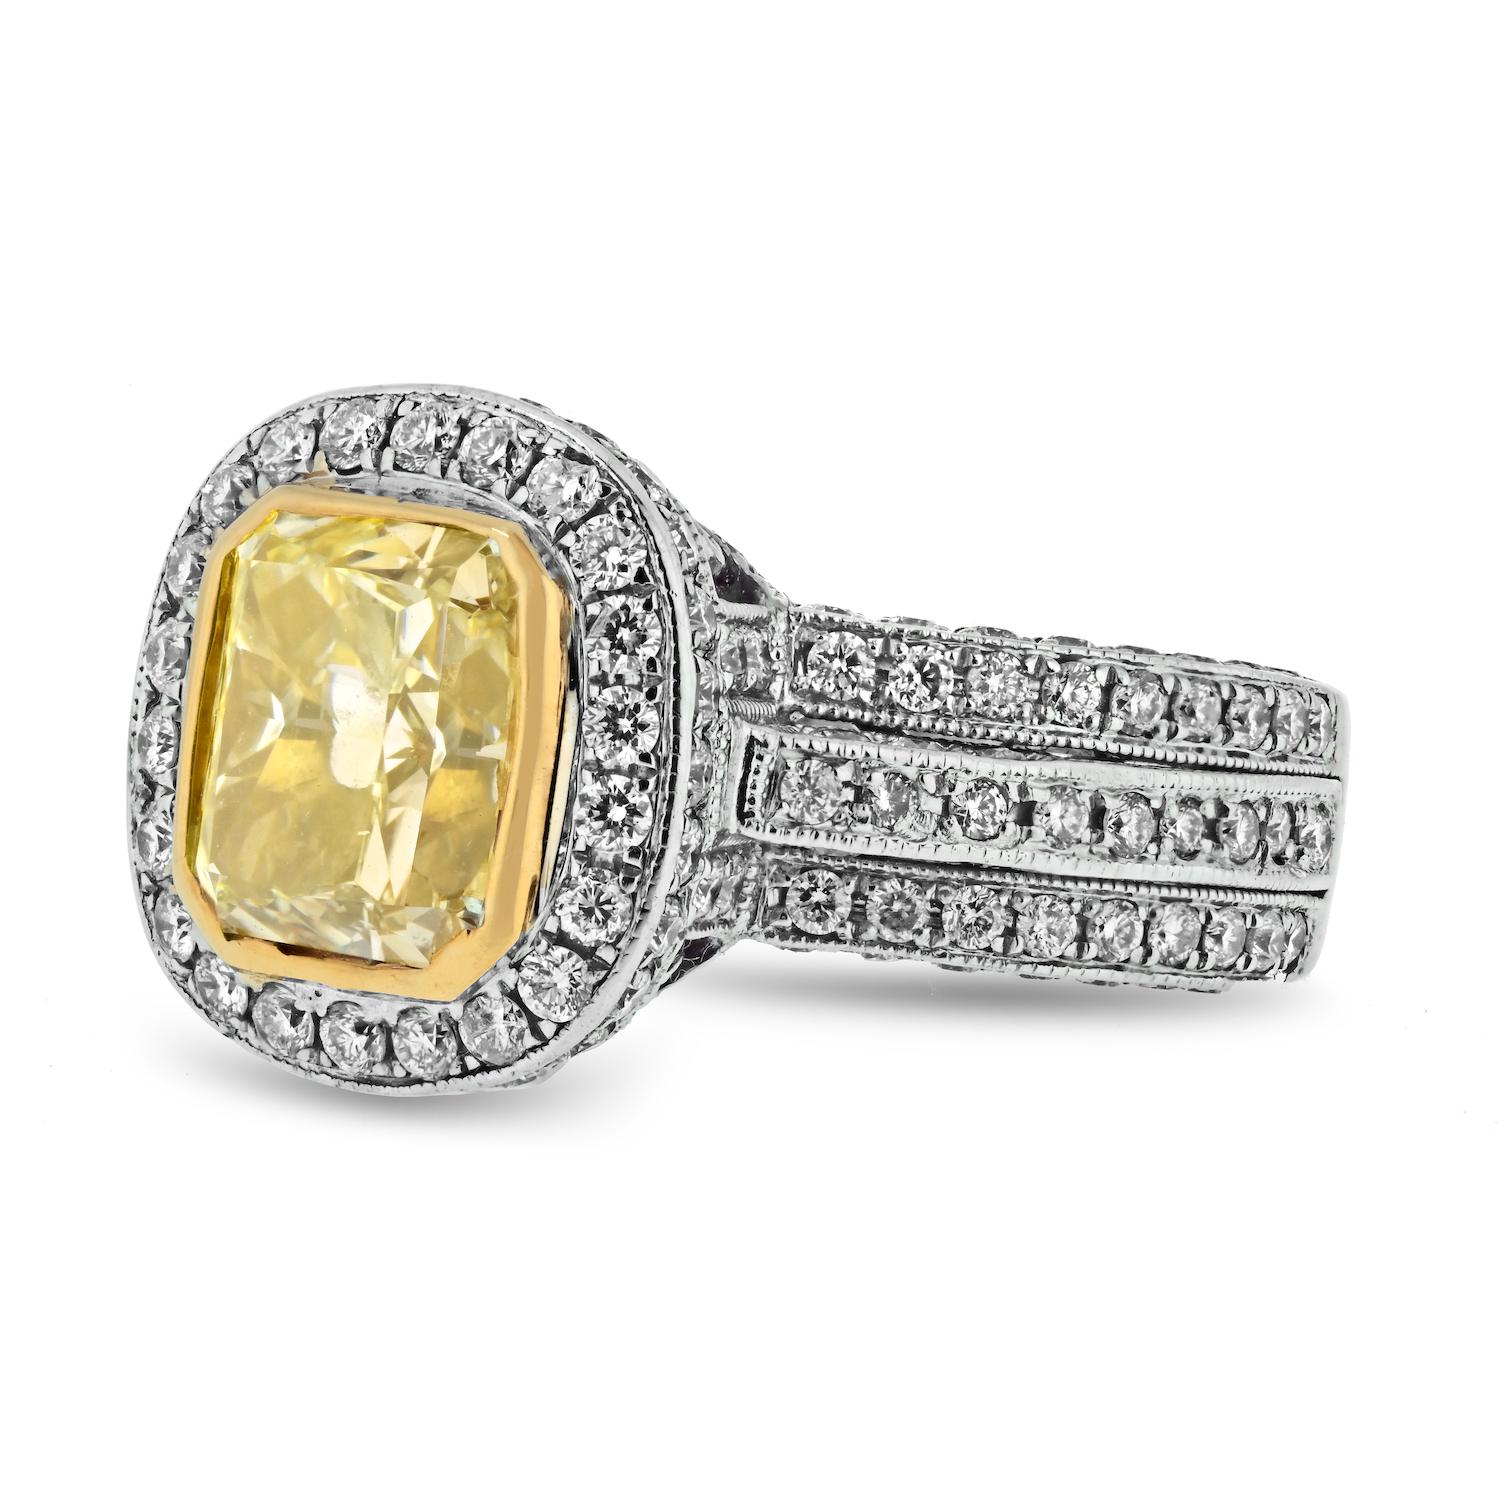 Modern 2.53ct Radiant Cut Fancy Light Yellow GIA Diamond Halo Engagement Ring For Sale